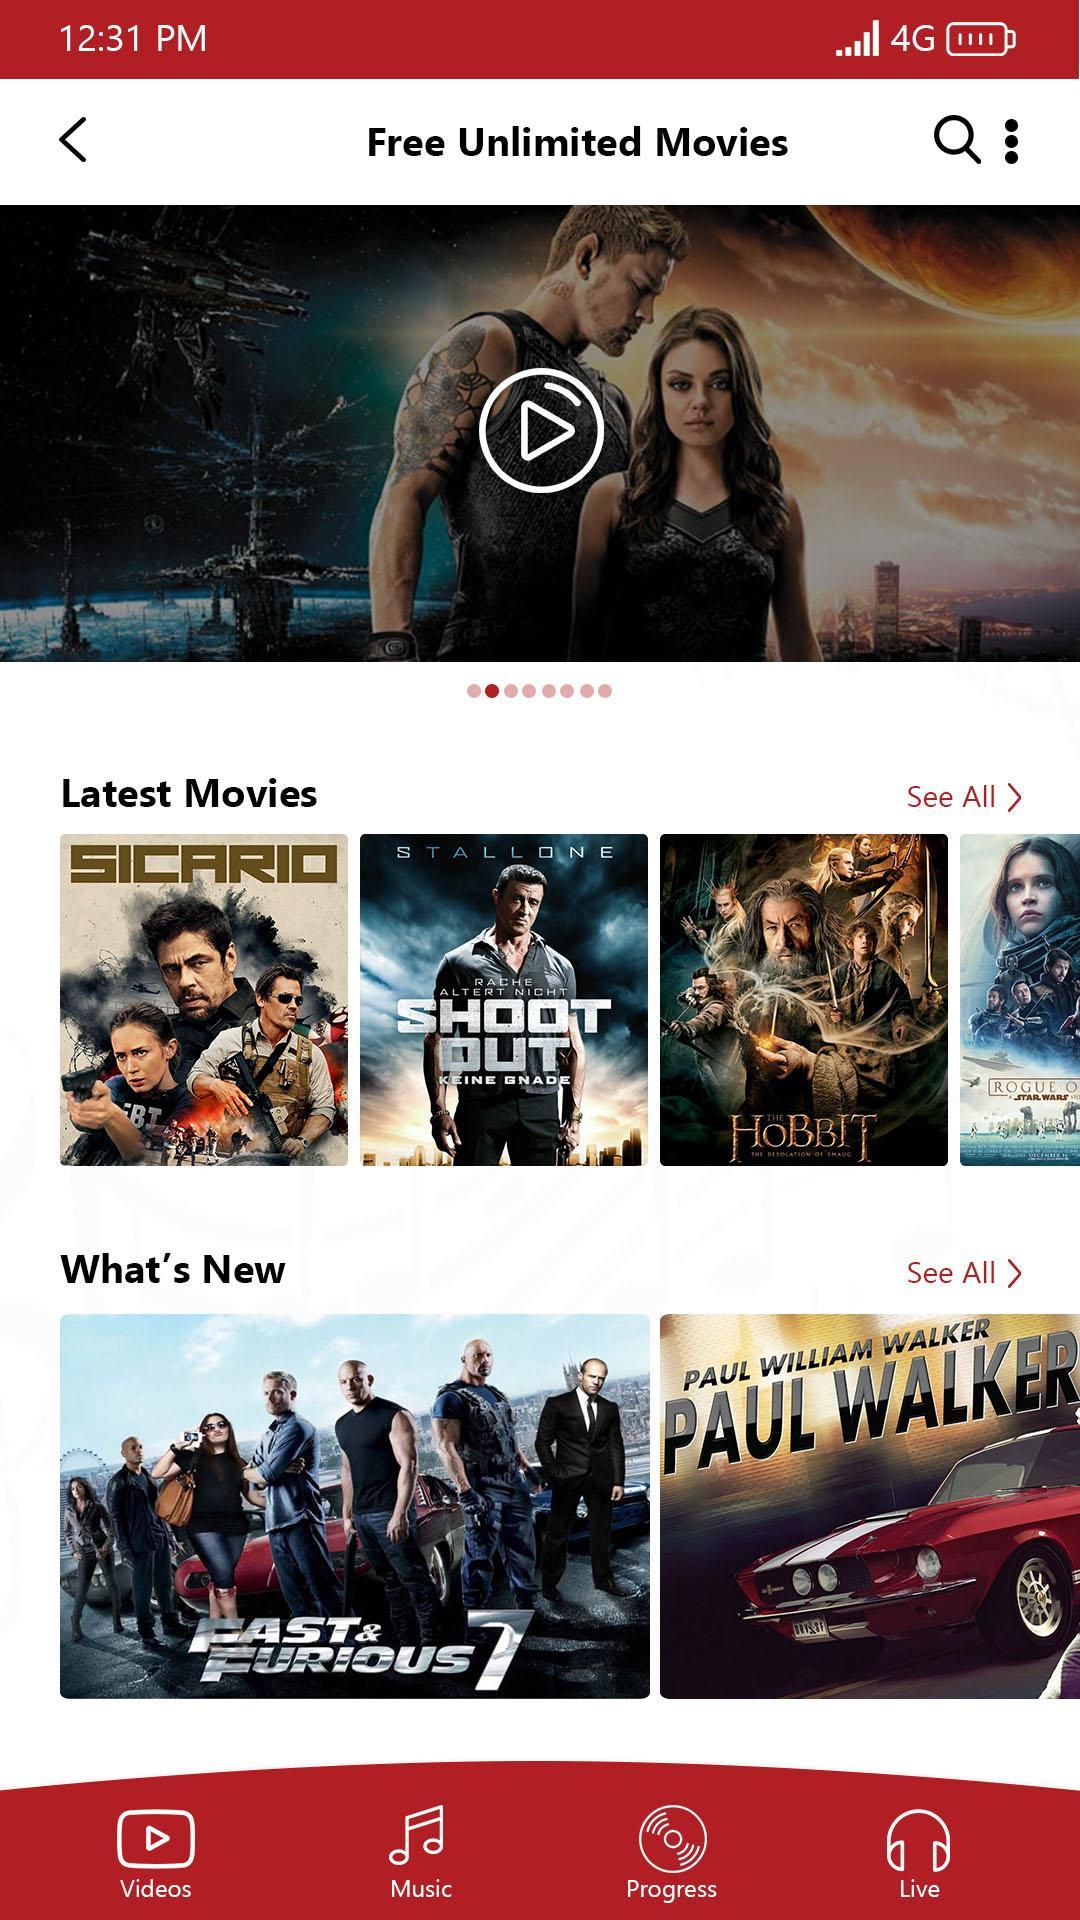 28 HQ Images Download Any Movies Free Unlimited - Free Unlimited Movies For Android Apk Download